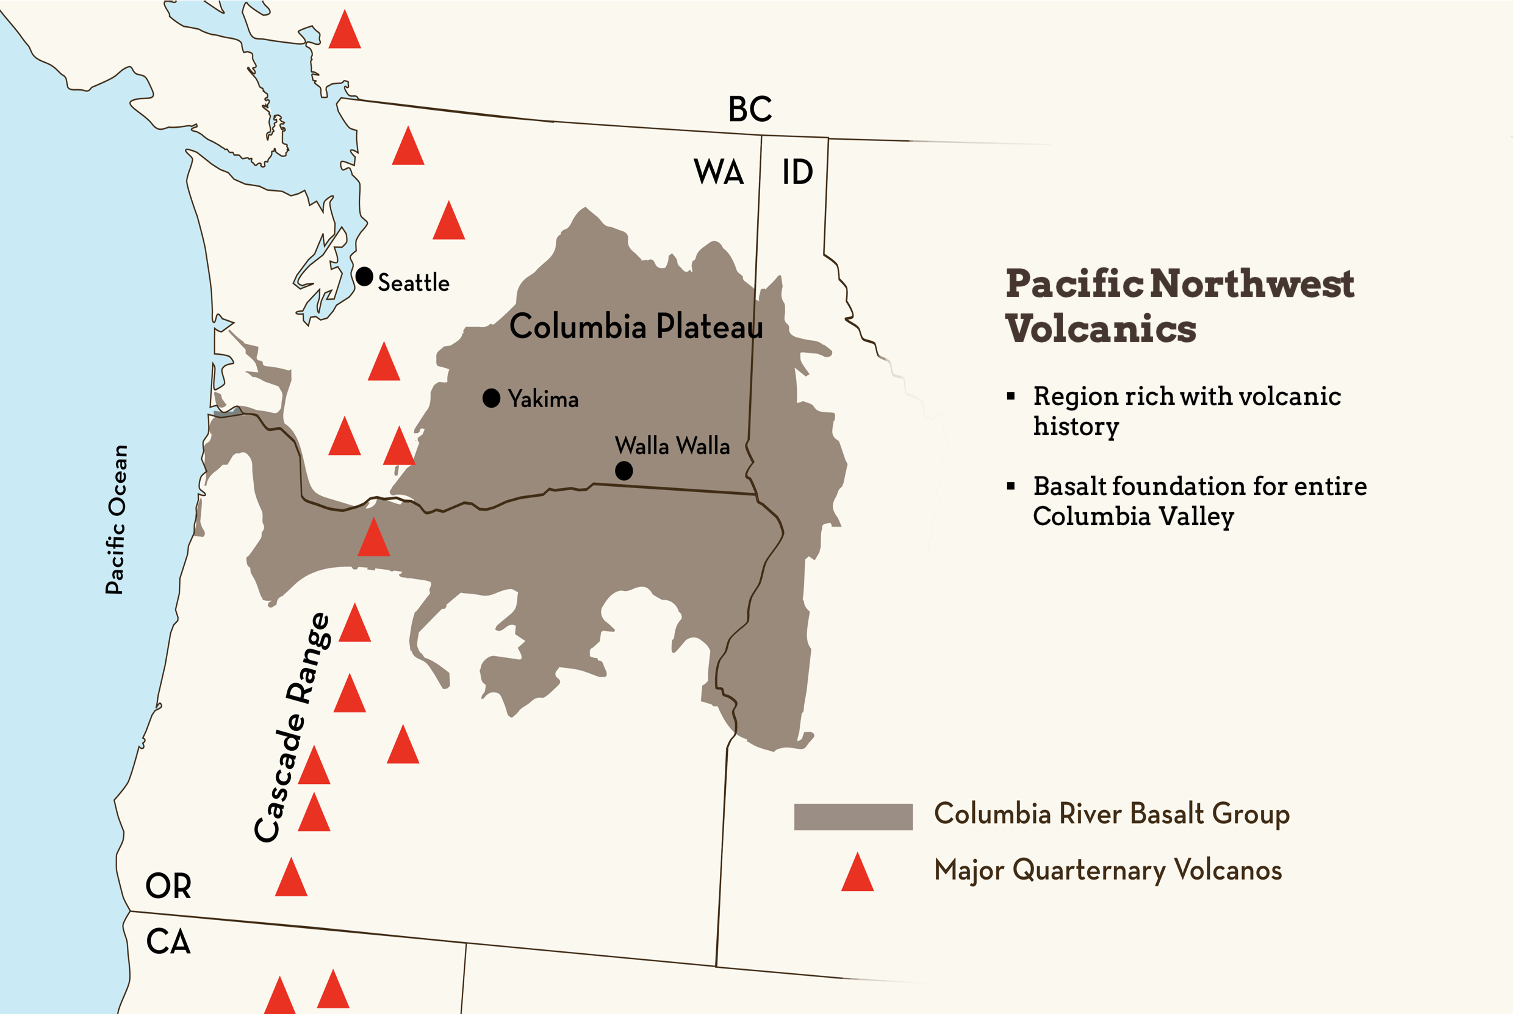 Map of the Northwest (WA, OR, ID, CA) showing the Columbia River Basalt Group and major quarternary volcanos.